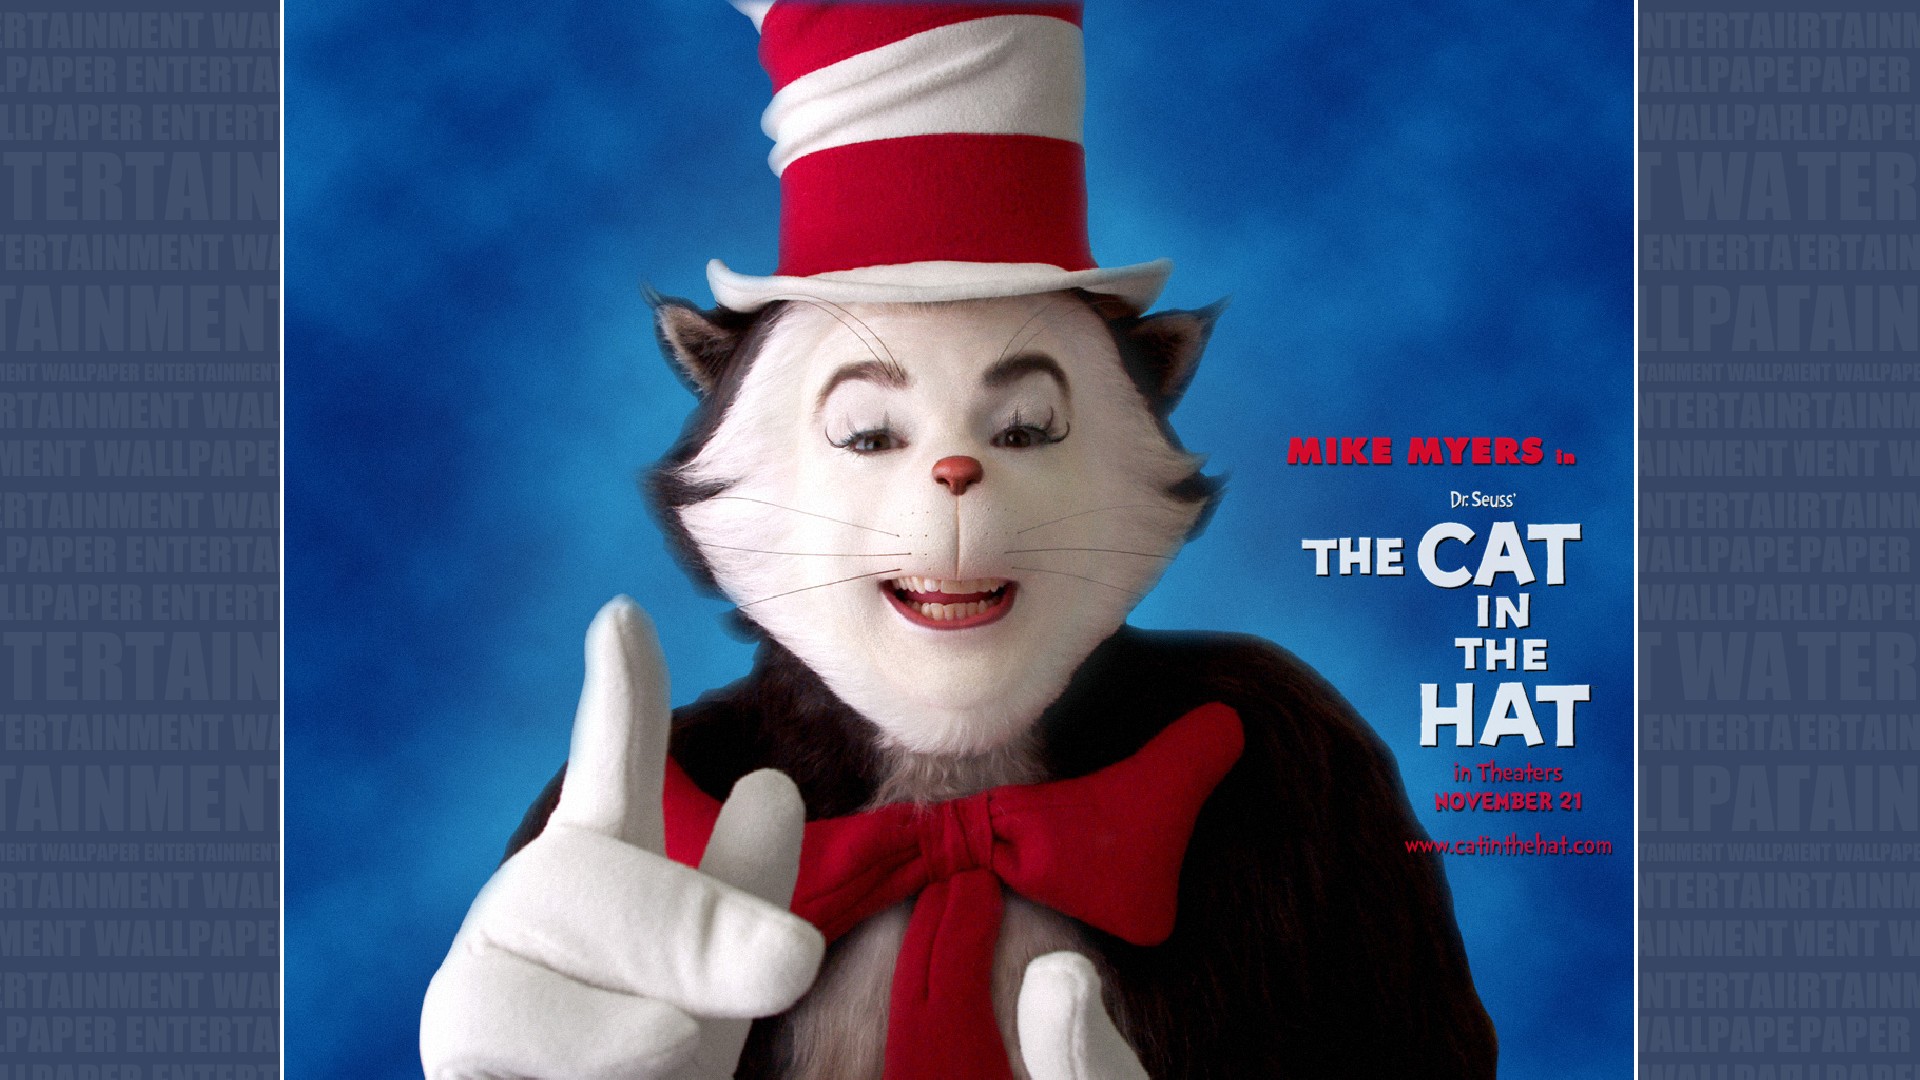  cat in the hat wallpaper size 1920x1080 more the cat in the